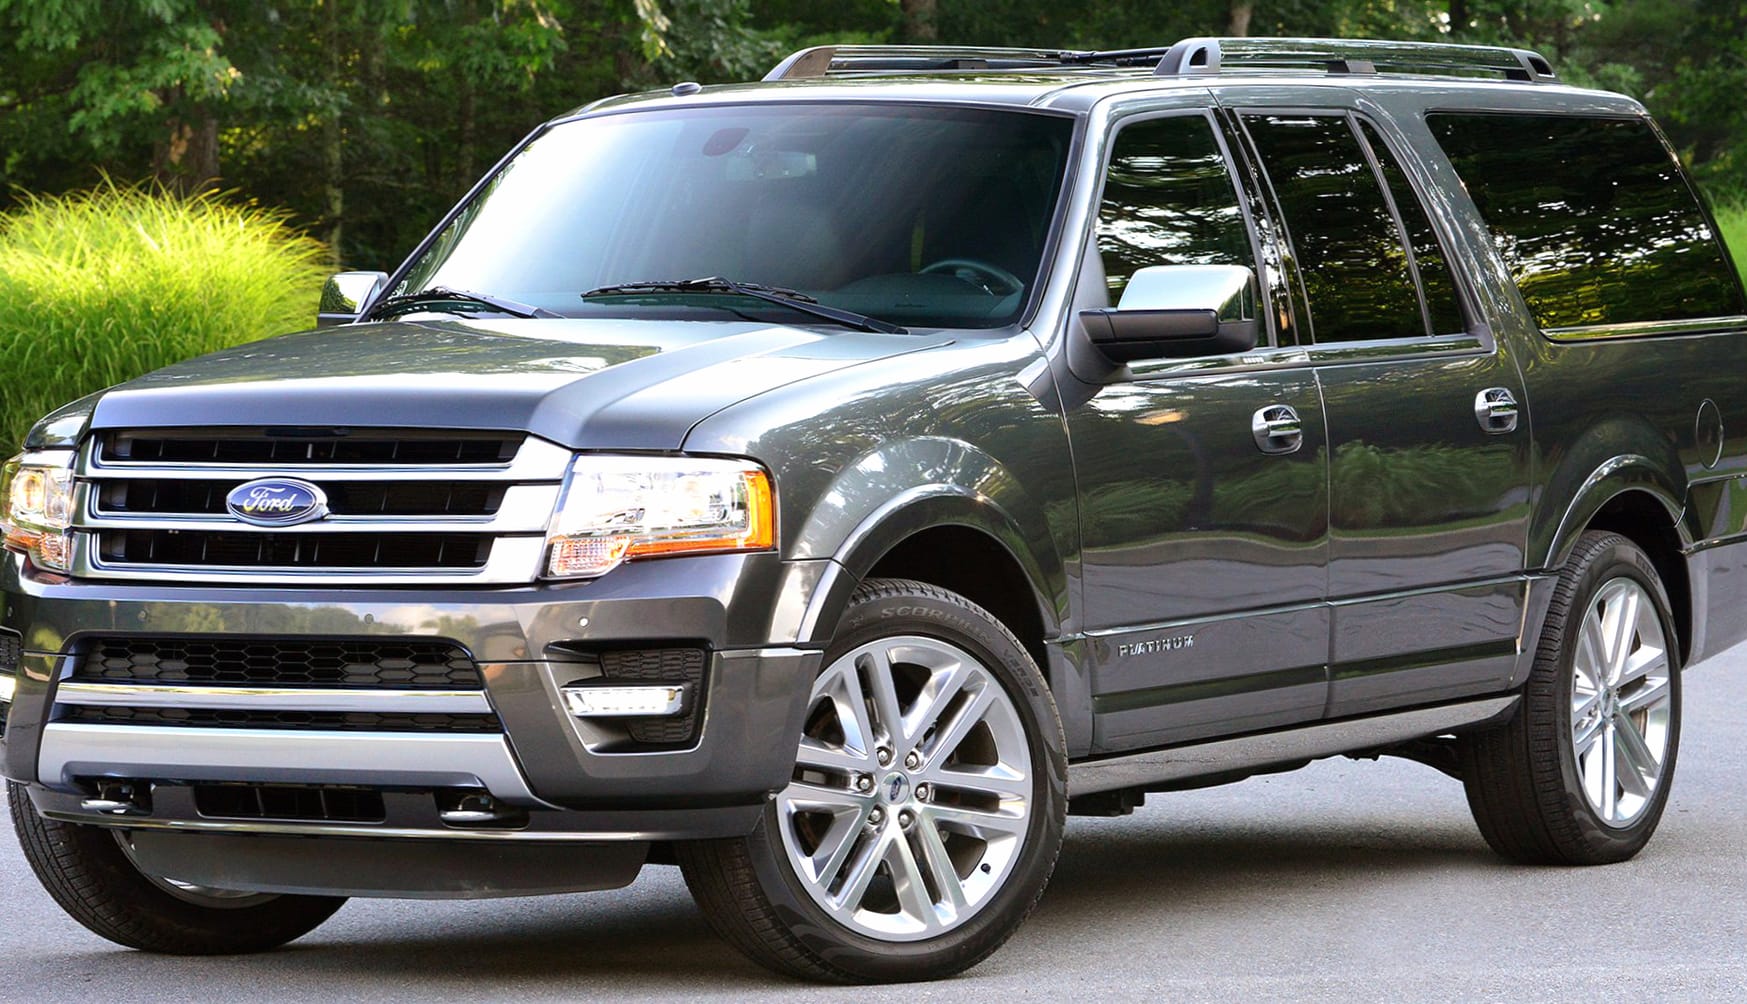 Ford Expedition EL Platinum wallpapers HD quality